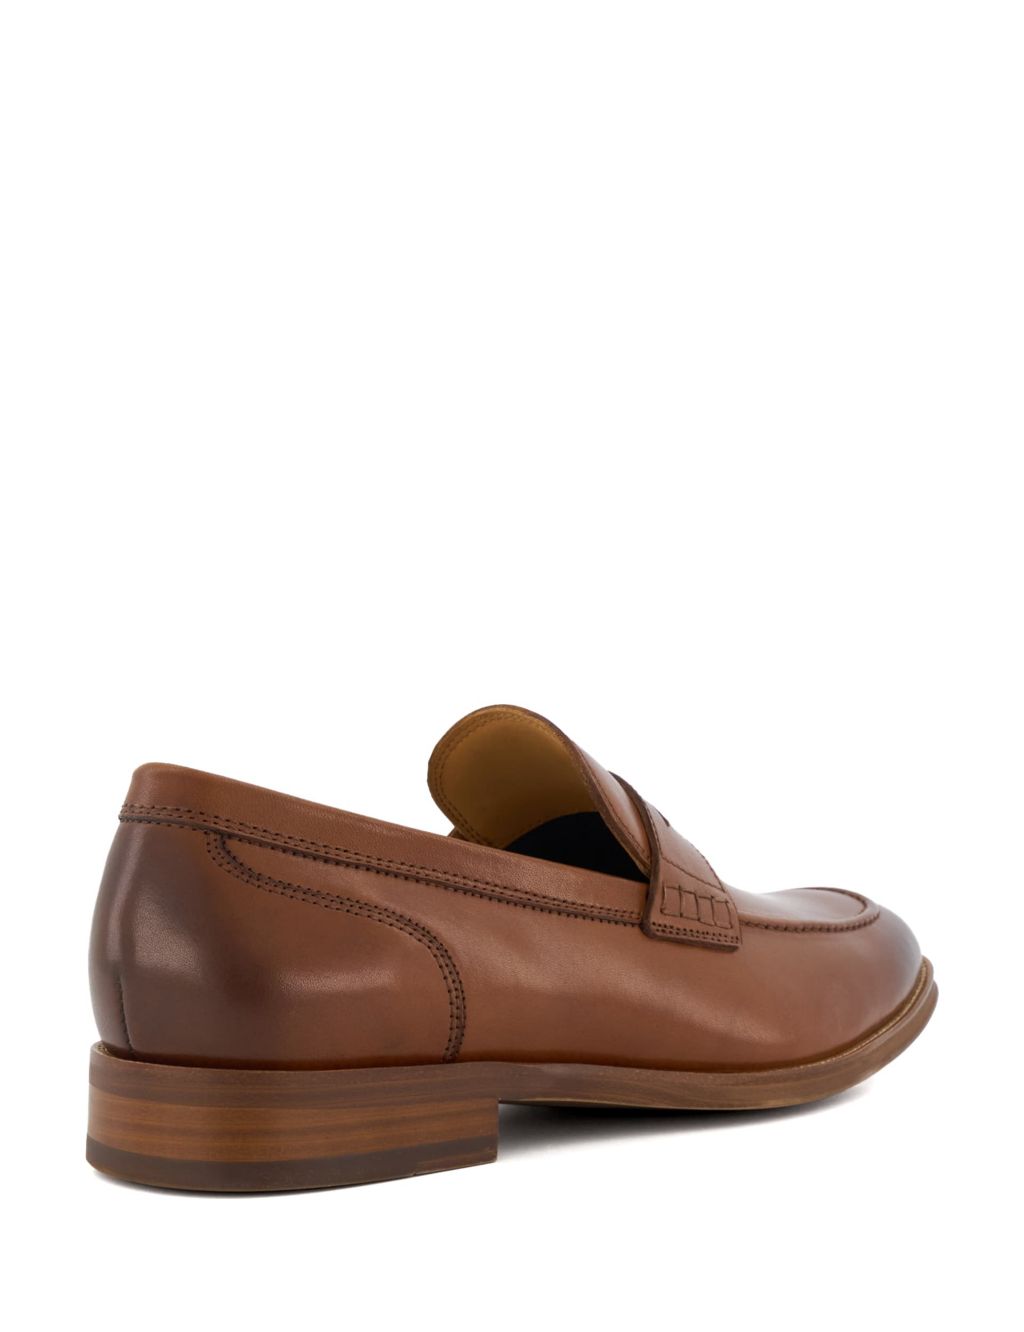 Leather Slip On Loafers image 3